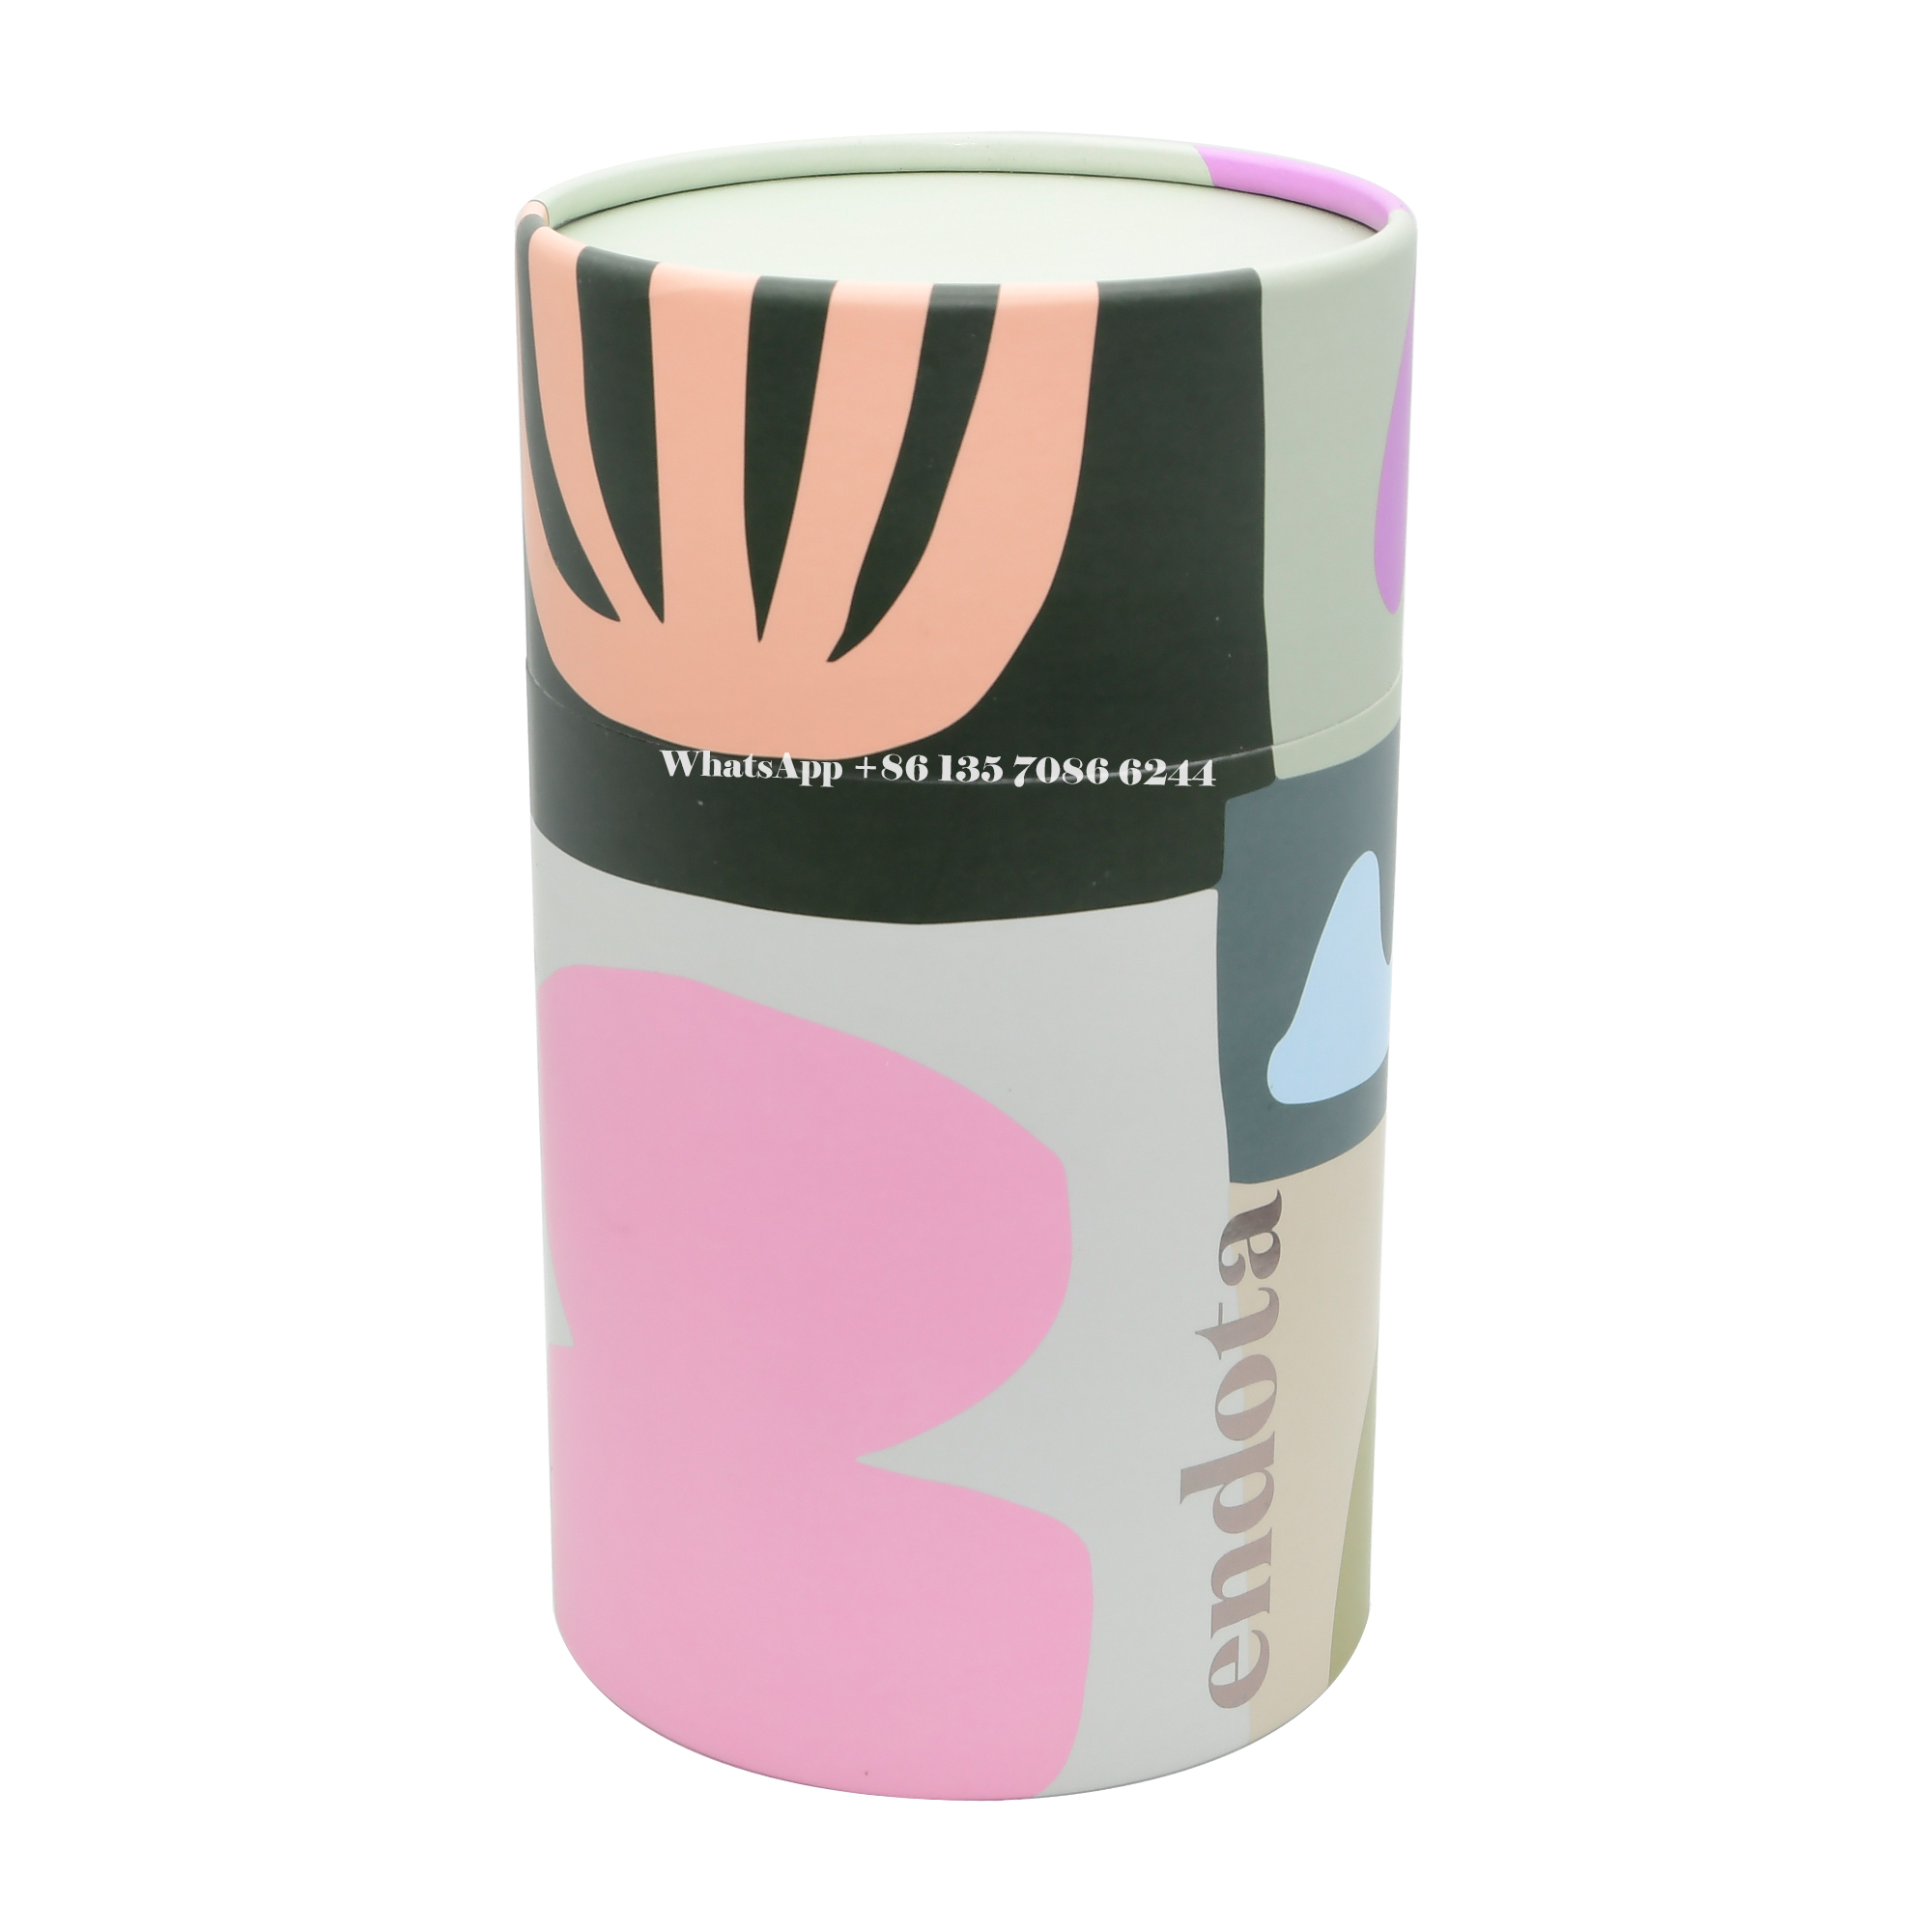  Protective Paper Cylinder Boxes for Skin Saver Kit Packaging  